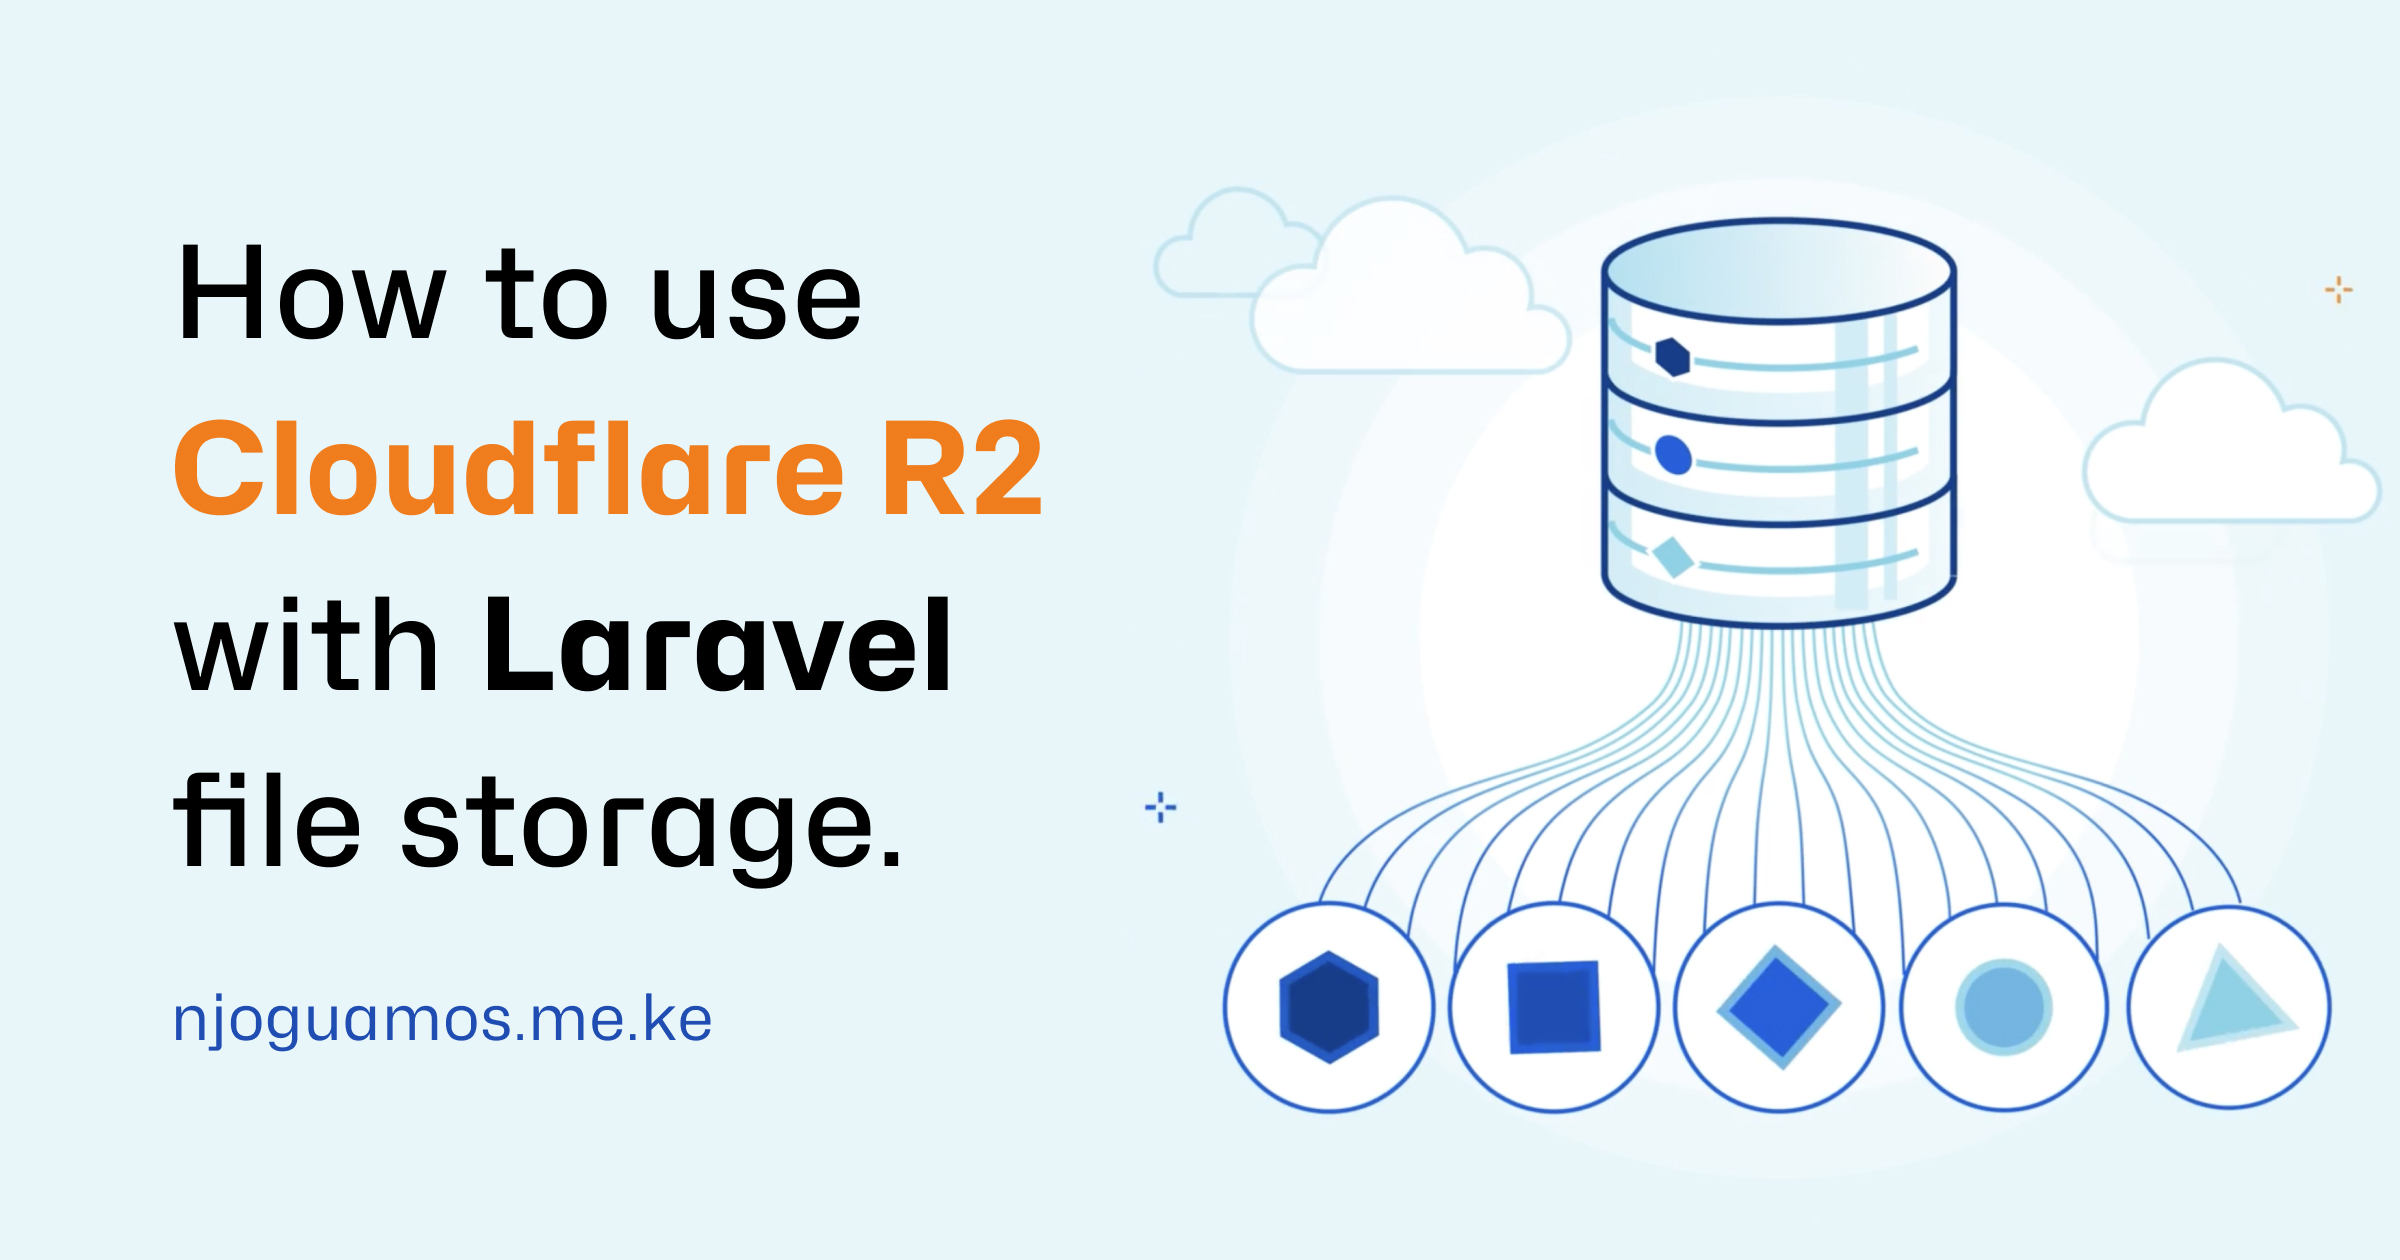 Image with text how to use cloudflare r2 with Laravel